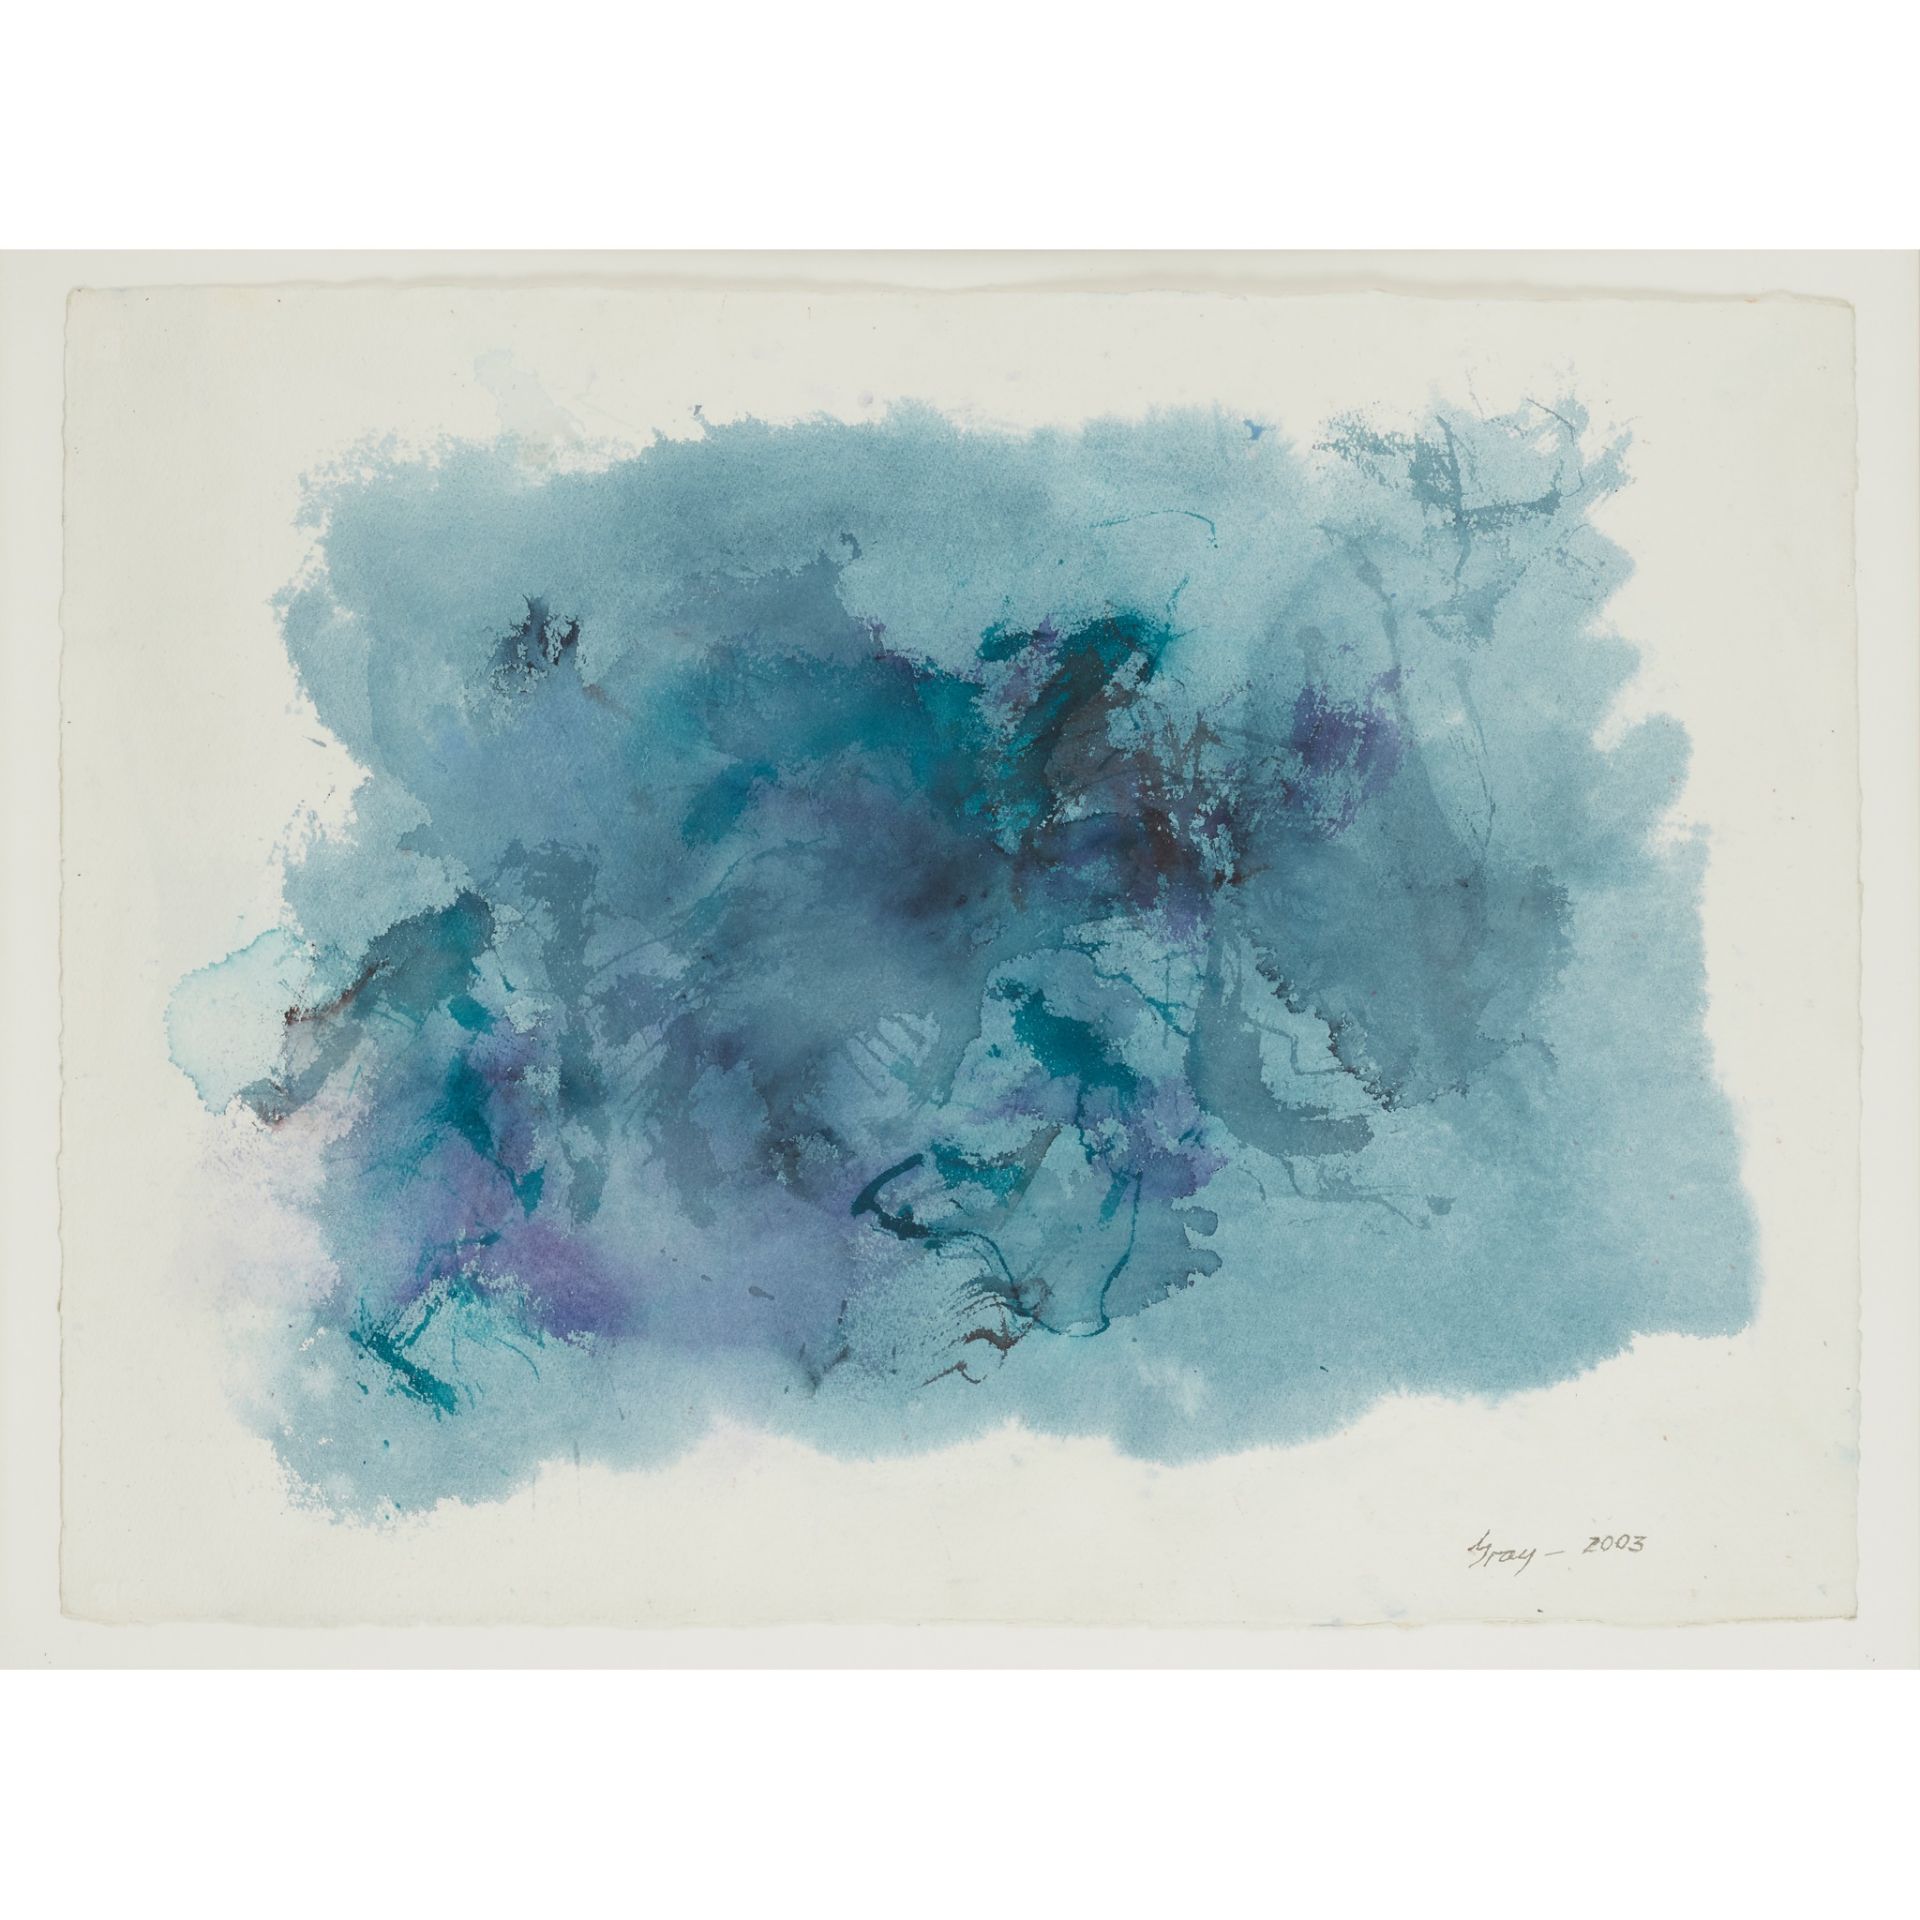 § CLEVE GRAY (AMERICAN 1918-2004) UNTITLED ABSTRACT (BLUE), 2003